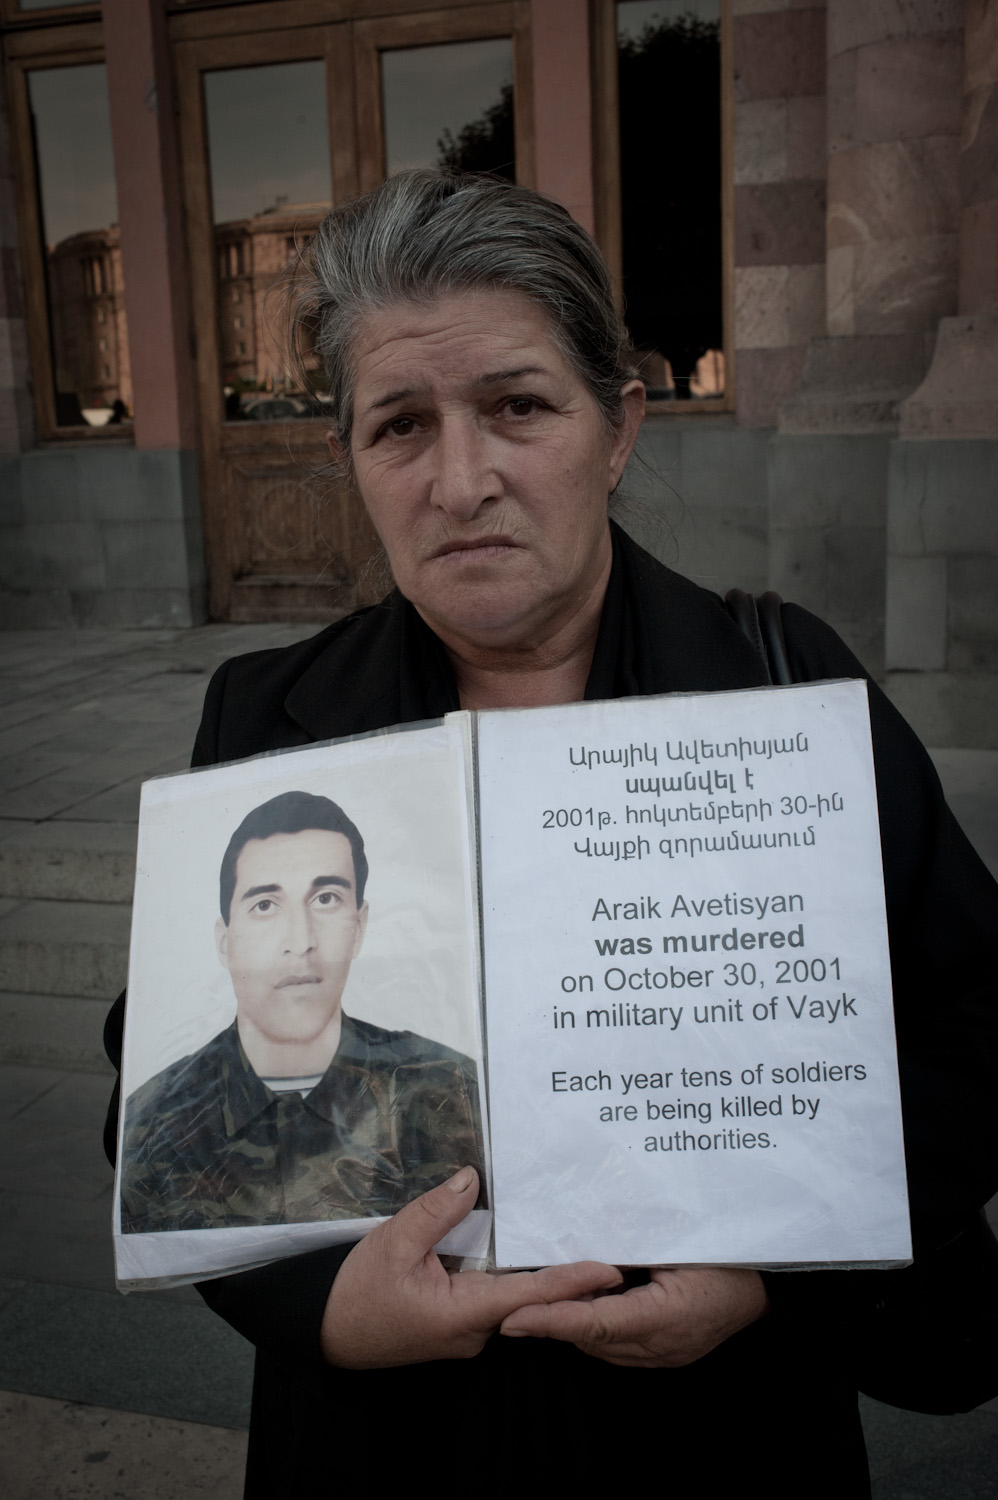  Anahit Avedisyan's son Araik was killed in 2001 - shot point blank in the head. The Avedisyan family believes that Araik's battalion commander while drunk, shot Araik for paying him only half of the $100 he had demanded for allowing Araik to take le